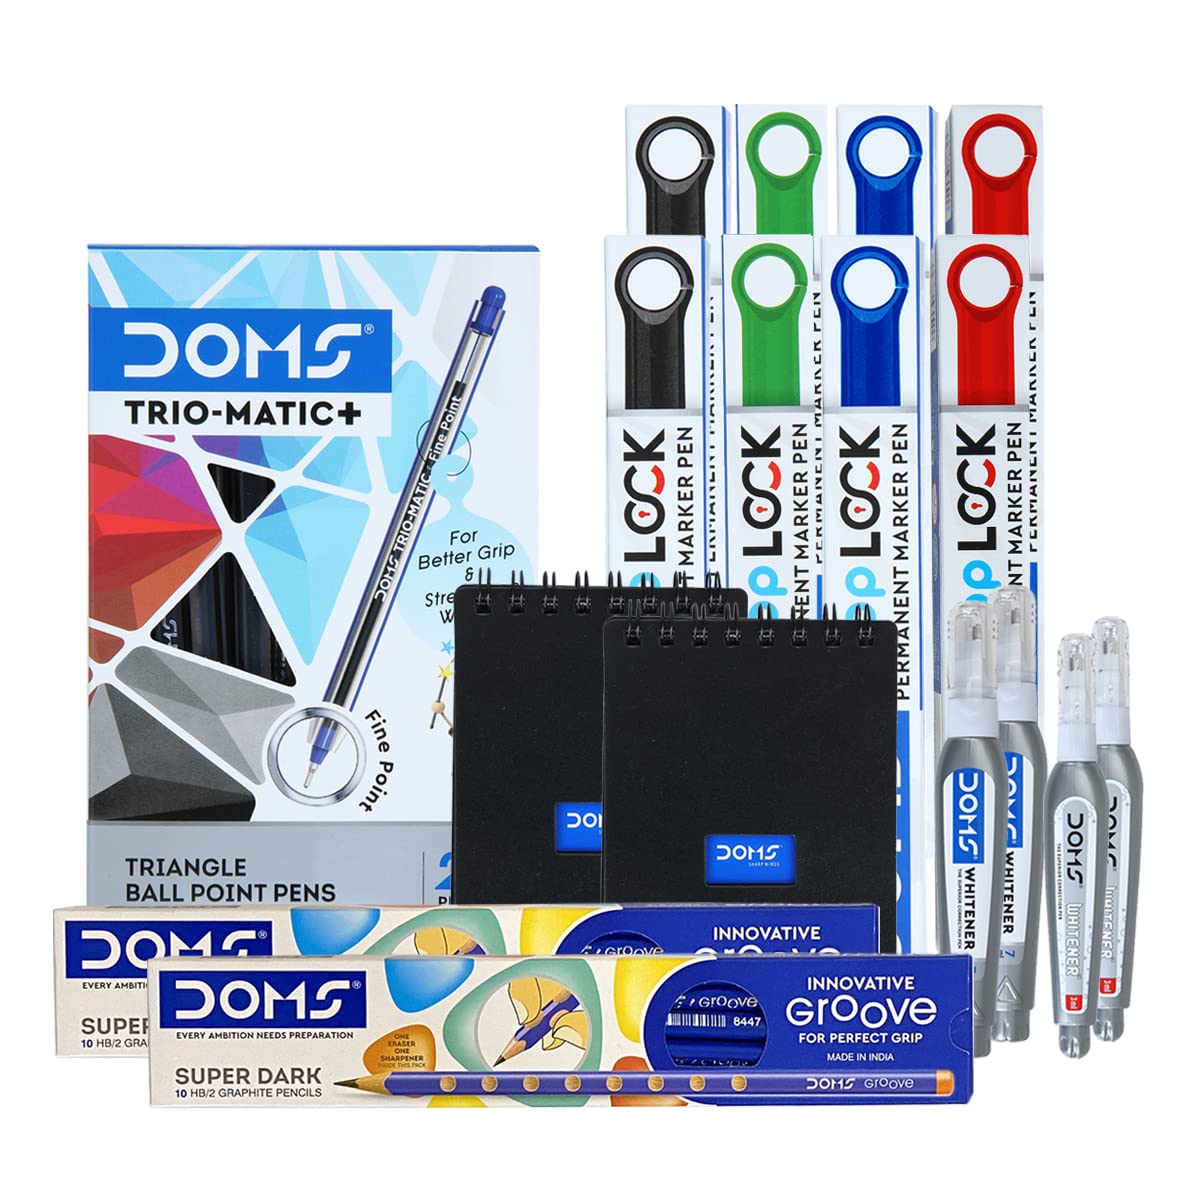 DOMS Office Smart Kit | Best for School, College & Office | 54 Assorted Items | Markers, Ball Pen, Graphite Pencil, Correction Pens, Pocket Dairy | DOMS Stationery | Stationery Items for Office